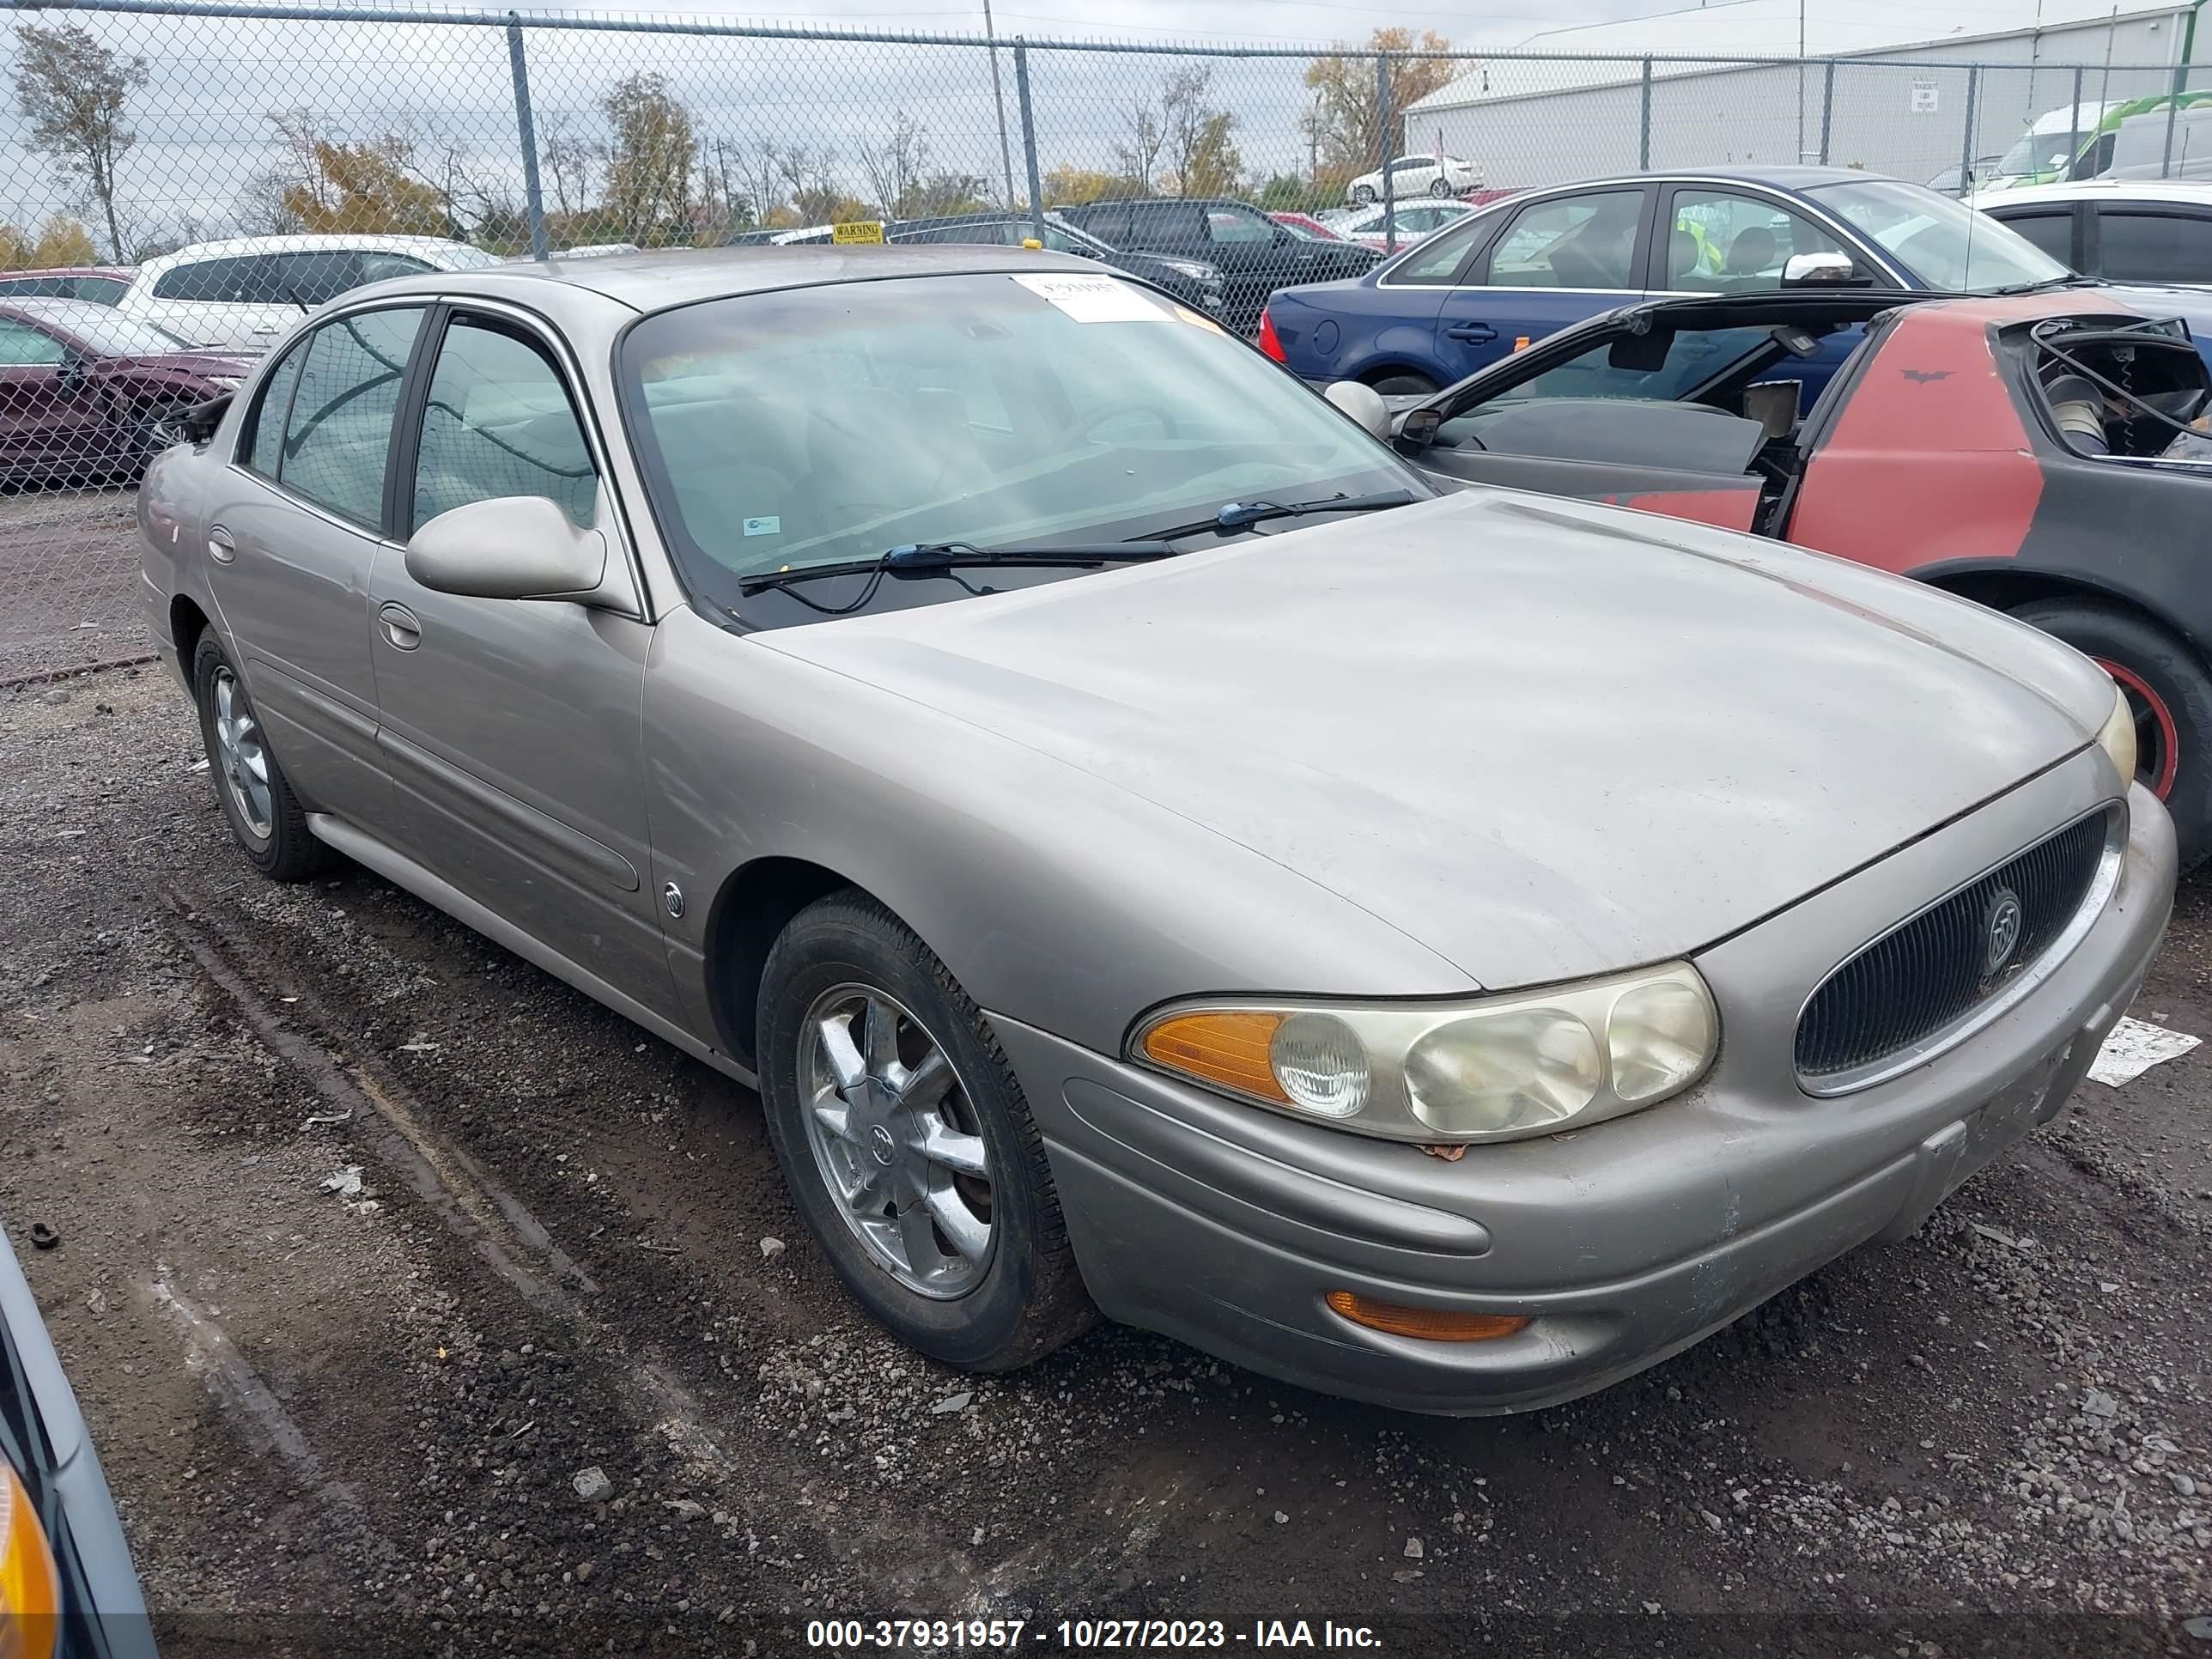 vin: 1G4HR54K544119285 1G4HR54K544119285 2004 buick lesabre 3800 for Sale in 45069, 10100 Windisch Rd, West Chester, USA